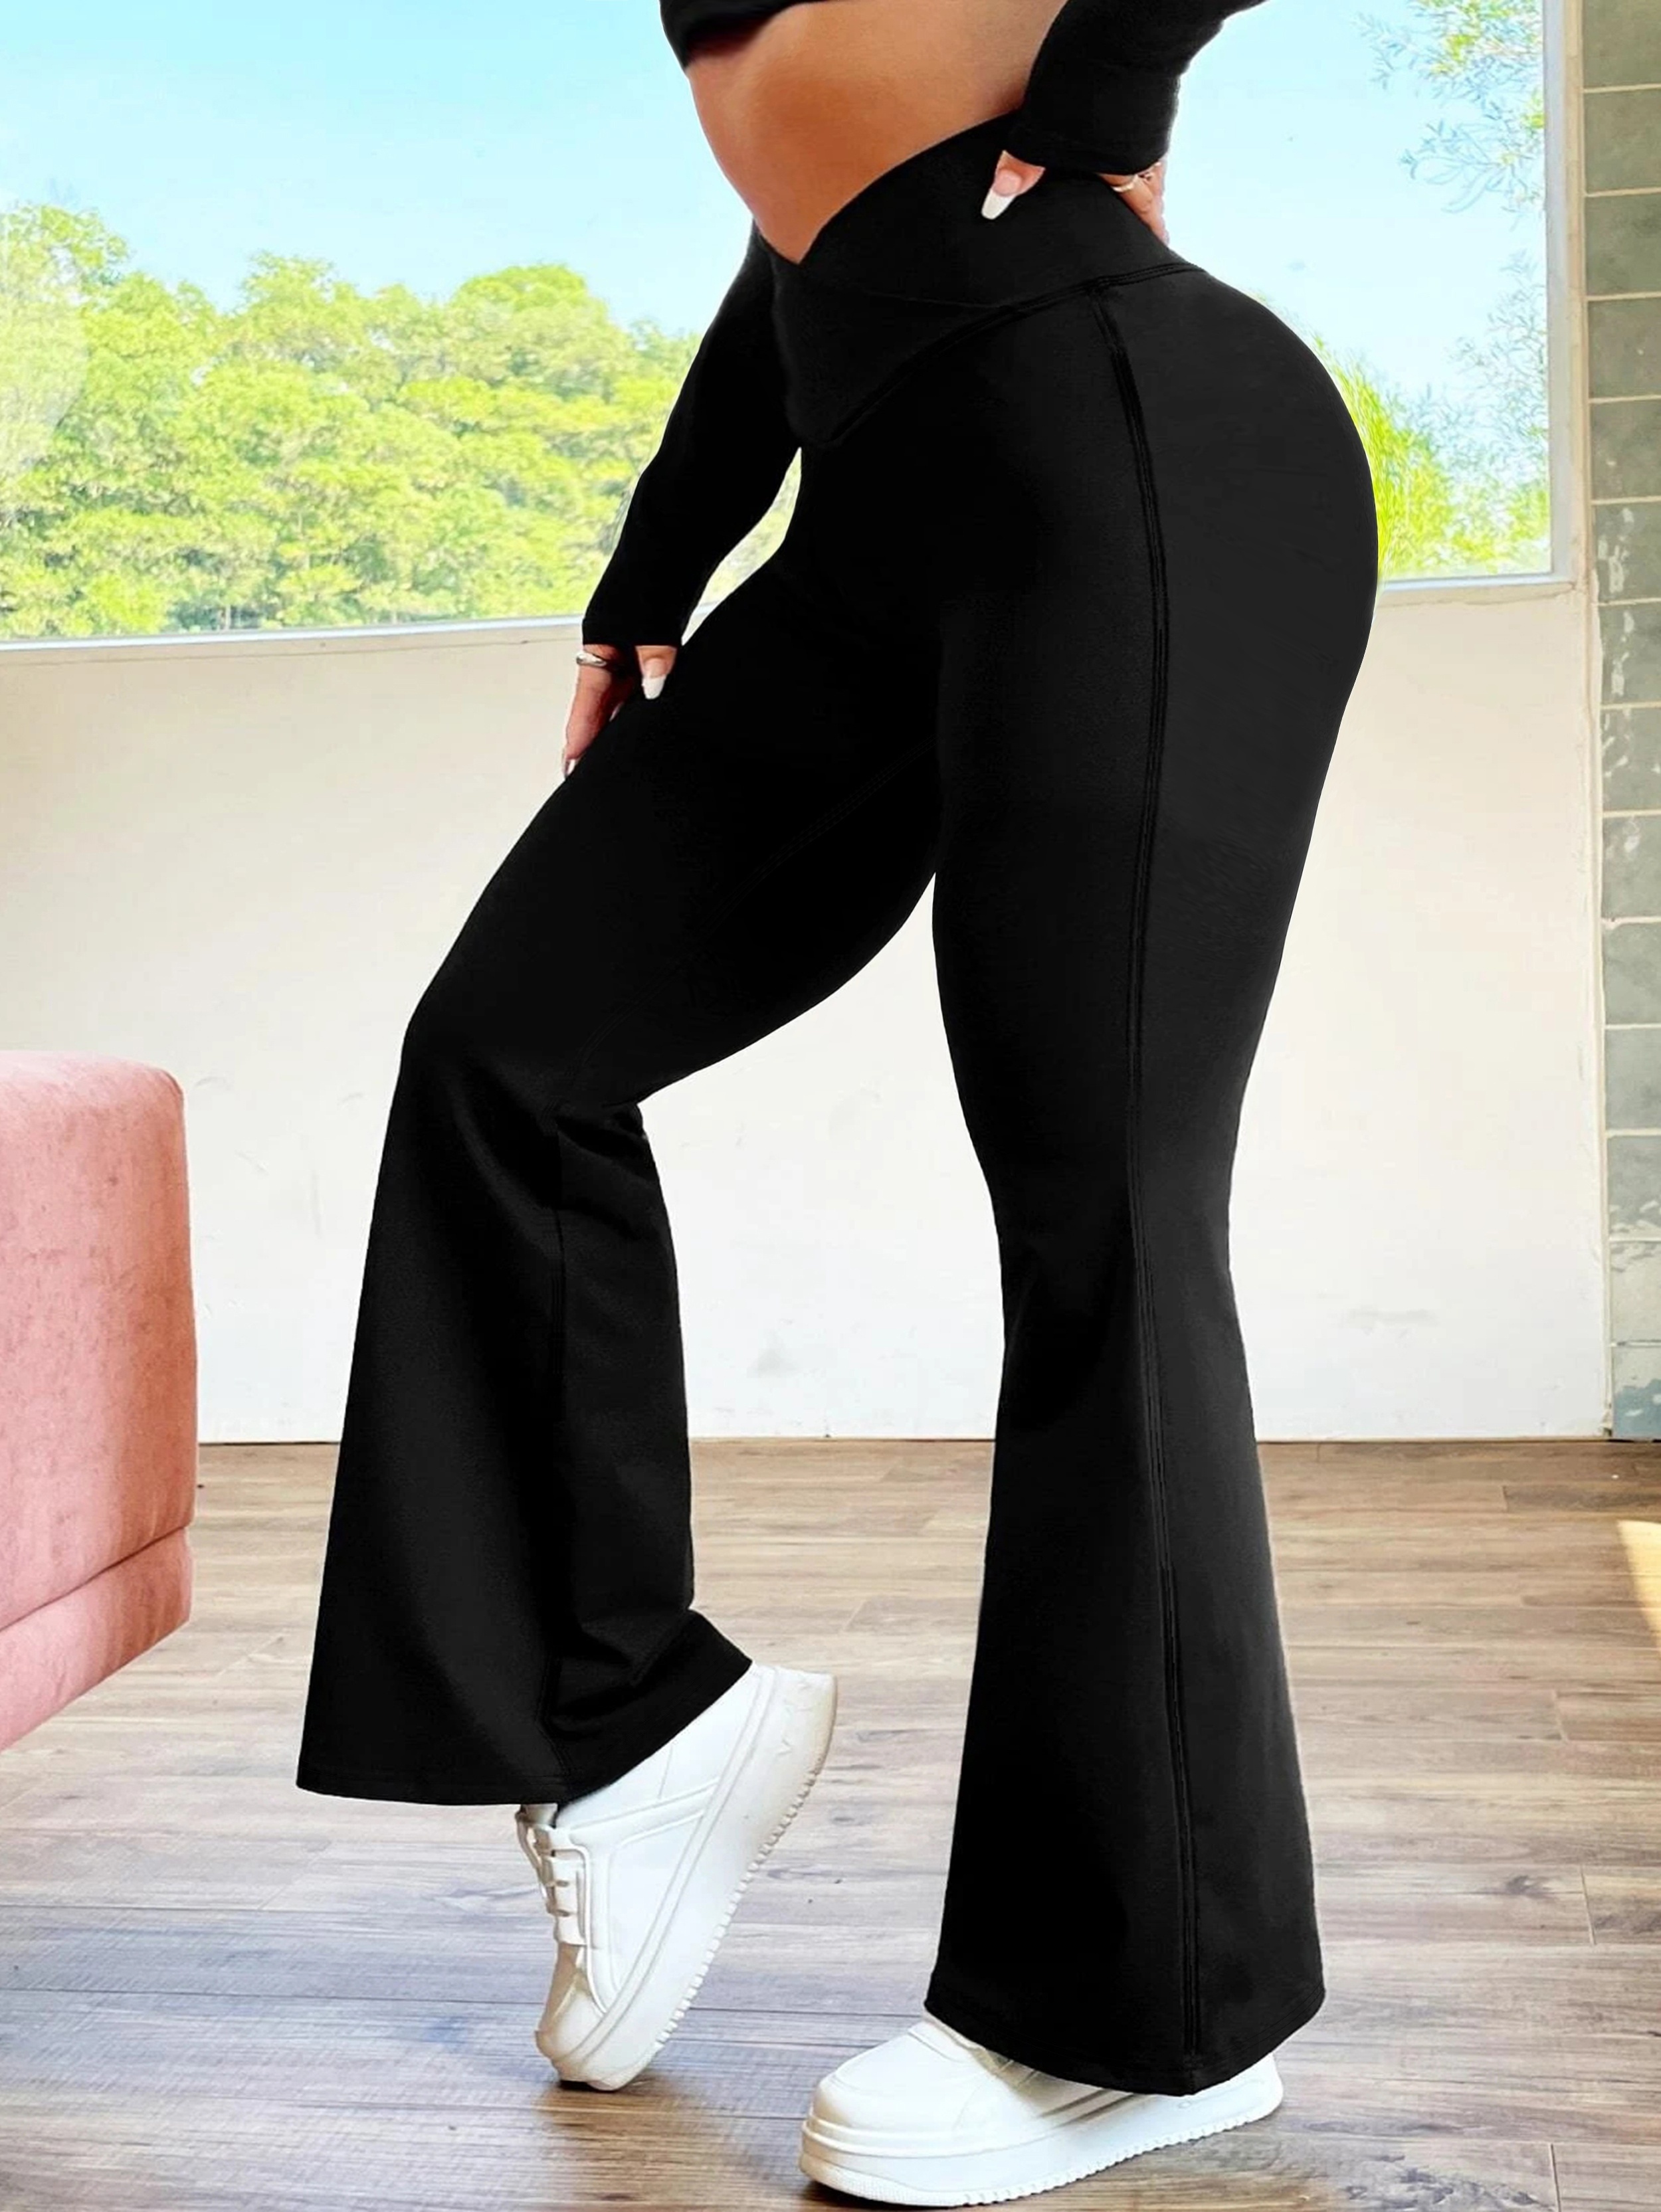 Solid Criss Cross Flare Leggings, High Waist Fitted Open Navel Criss Cross  Strap Black Flare Pants, Women's Clothing